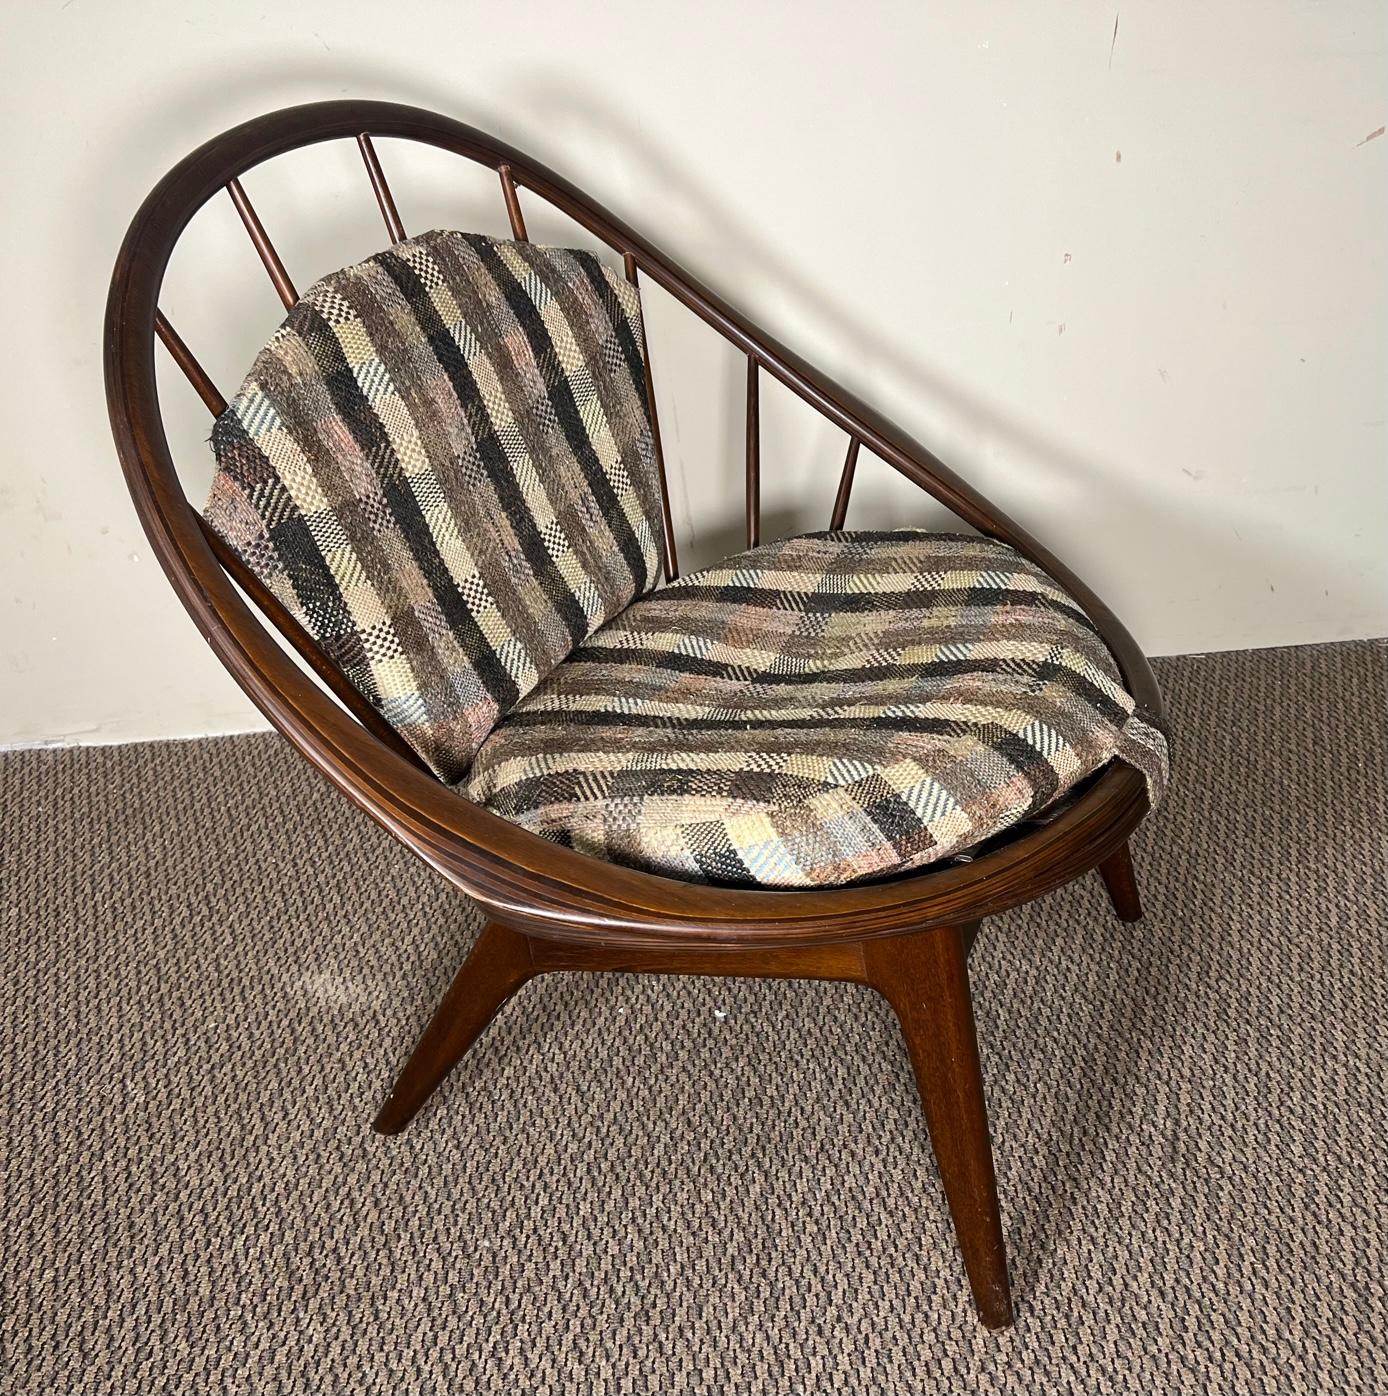 Mid century modern walnut lounge chair by Kofod Larsen for Selig. Model Peacock chair. Original label underneath the chair. Upholstery appears to be original and is in need of replacement. Straps on back cushion missing. Wood frame is in very nice